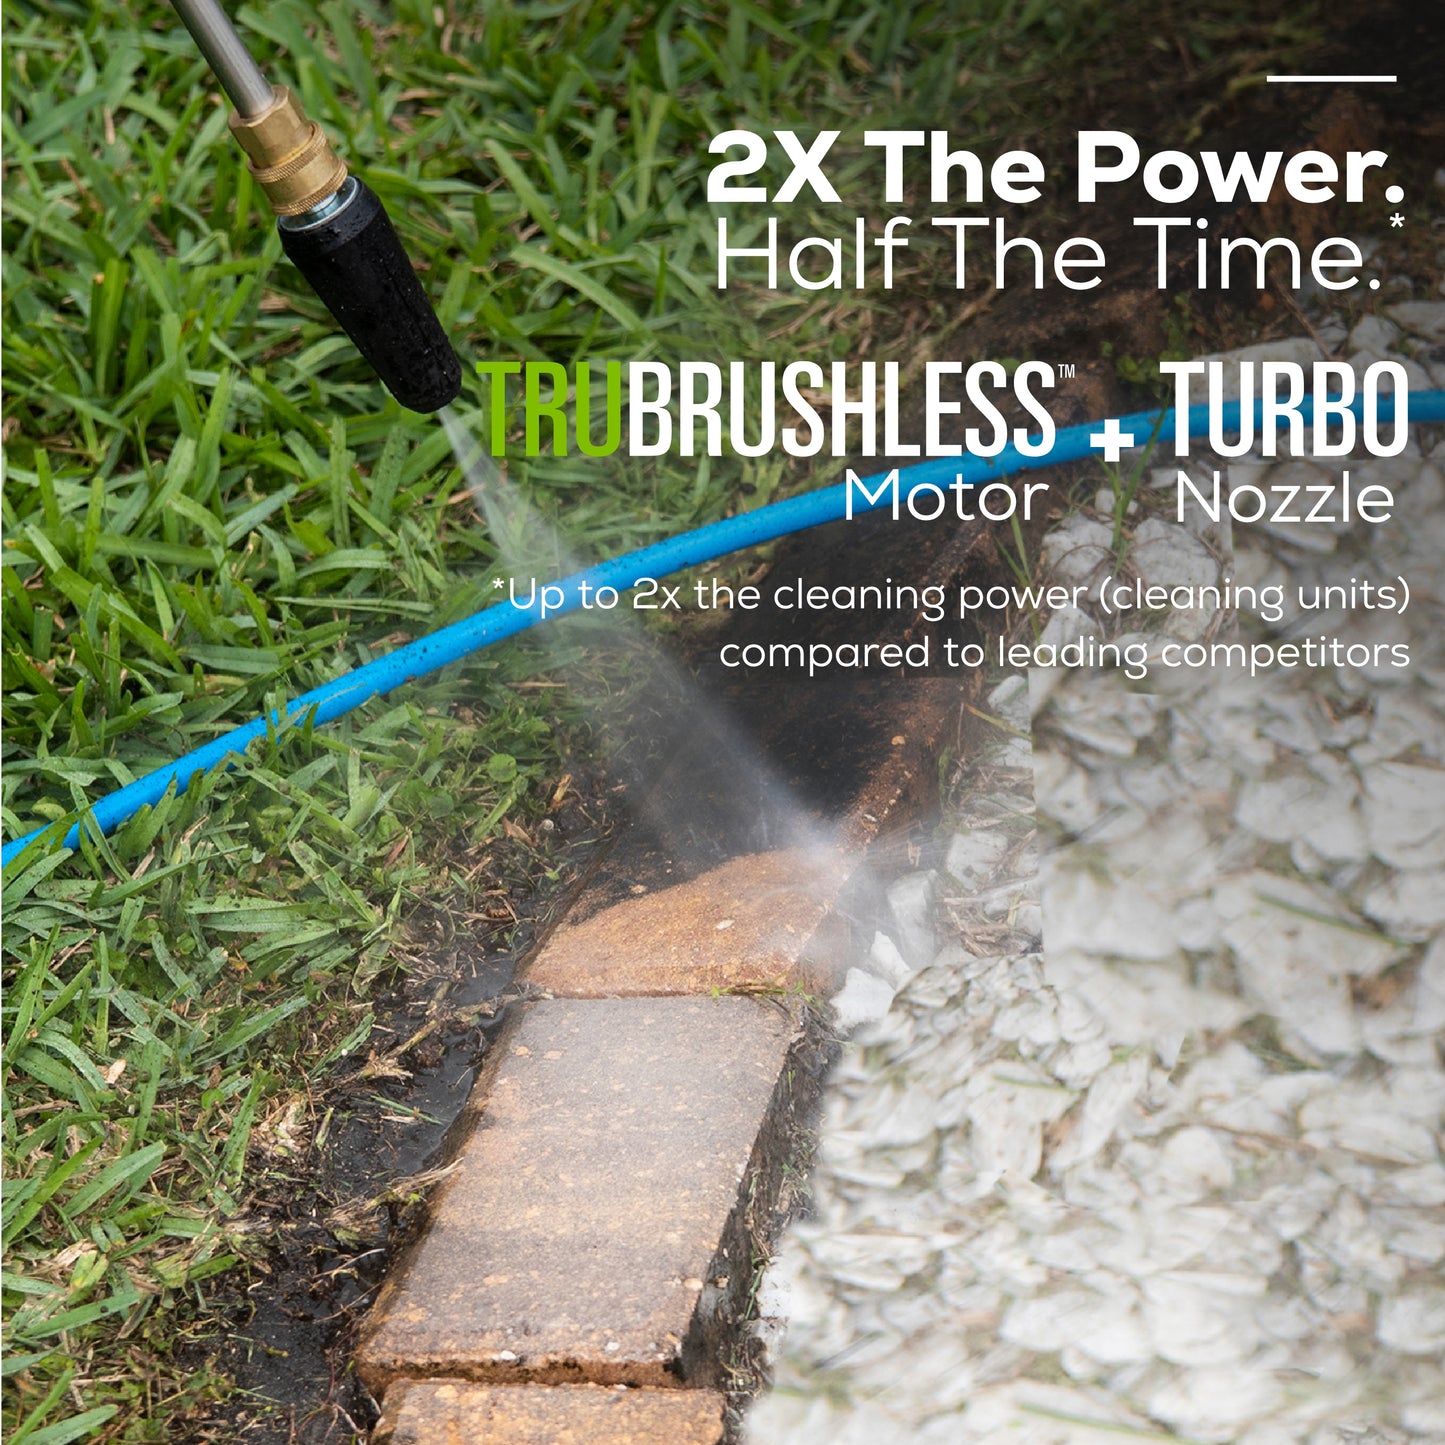 2300 PSI 1.2-GPM Cold Water Electric Pressure Washer